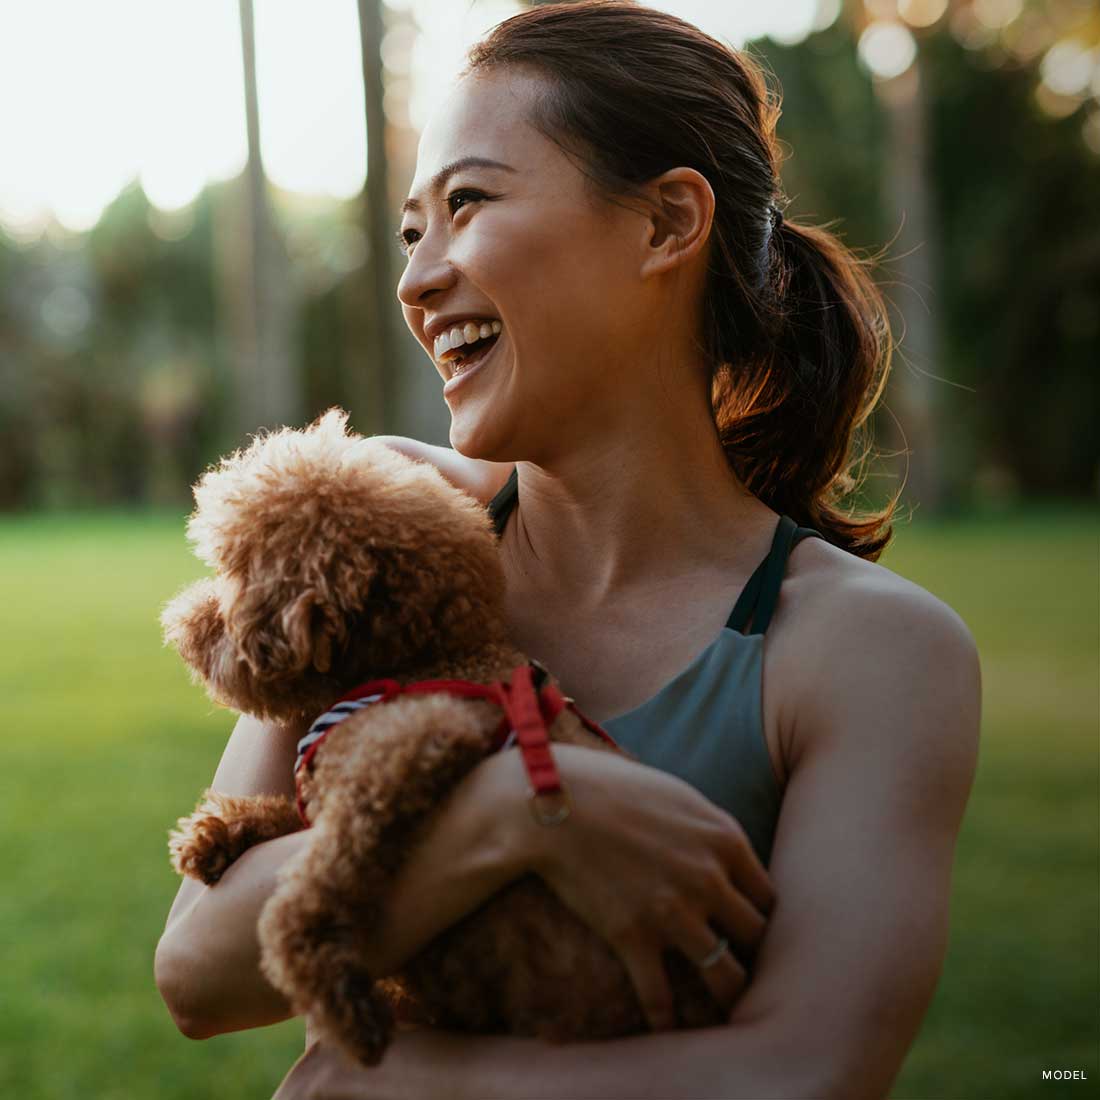 Asian woman with happily holding a dog in a park